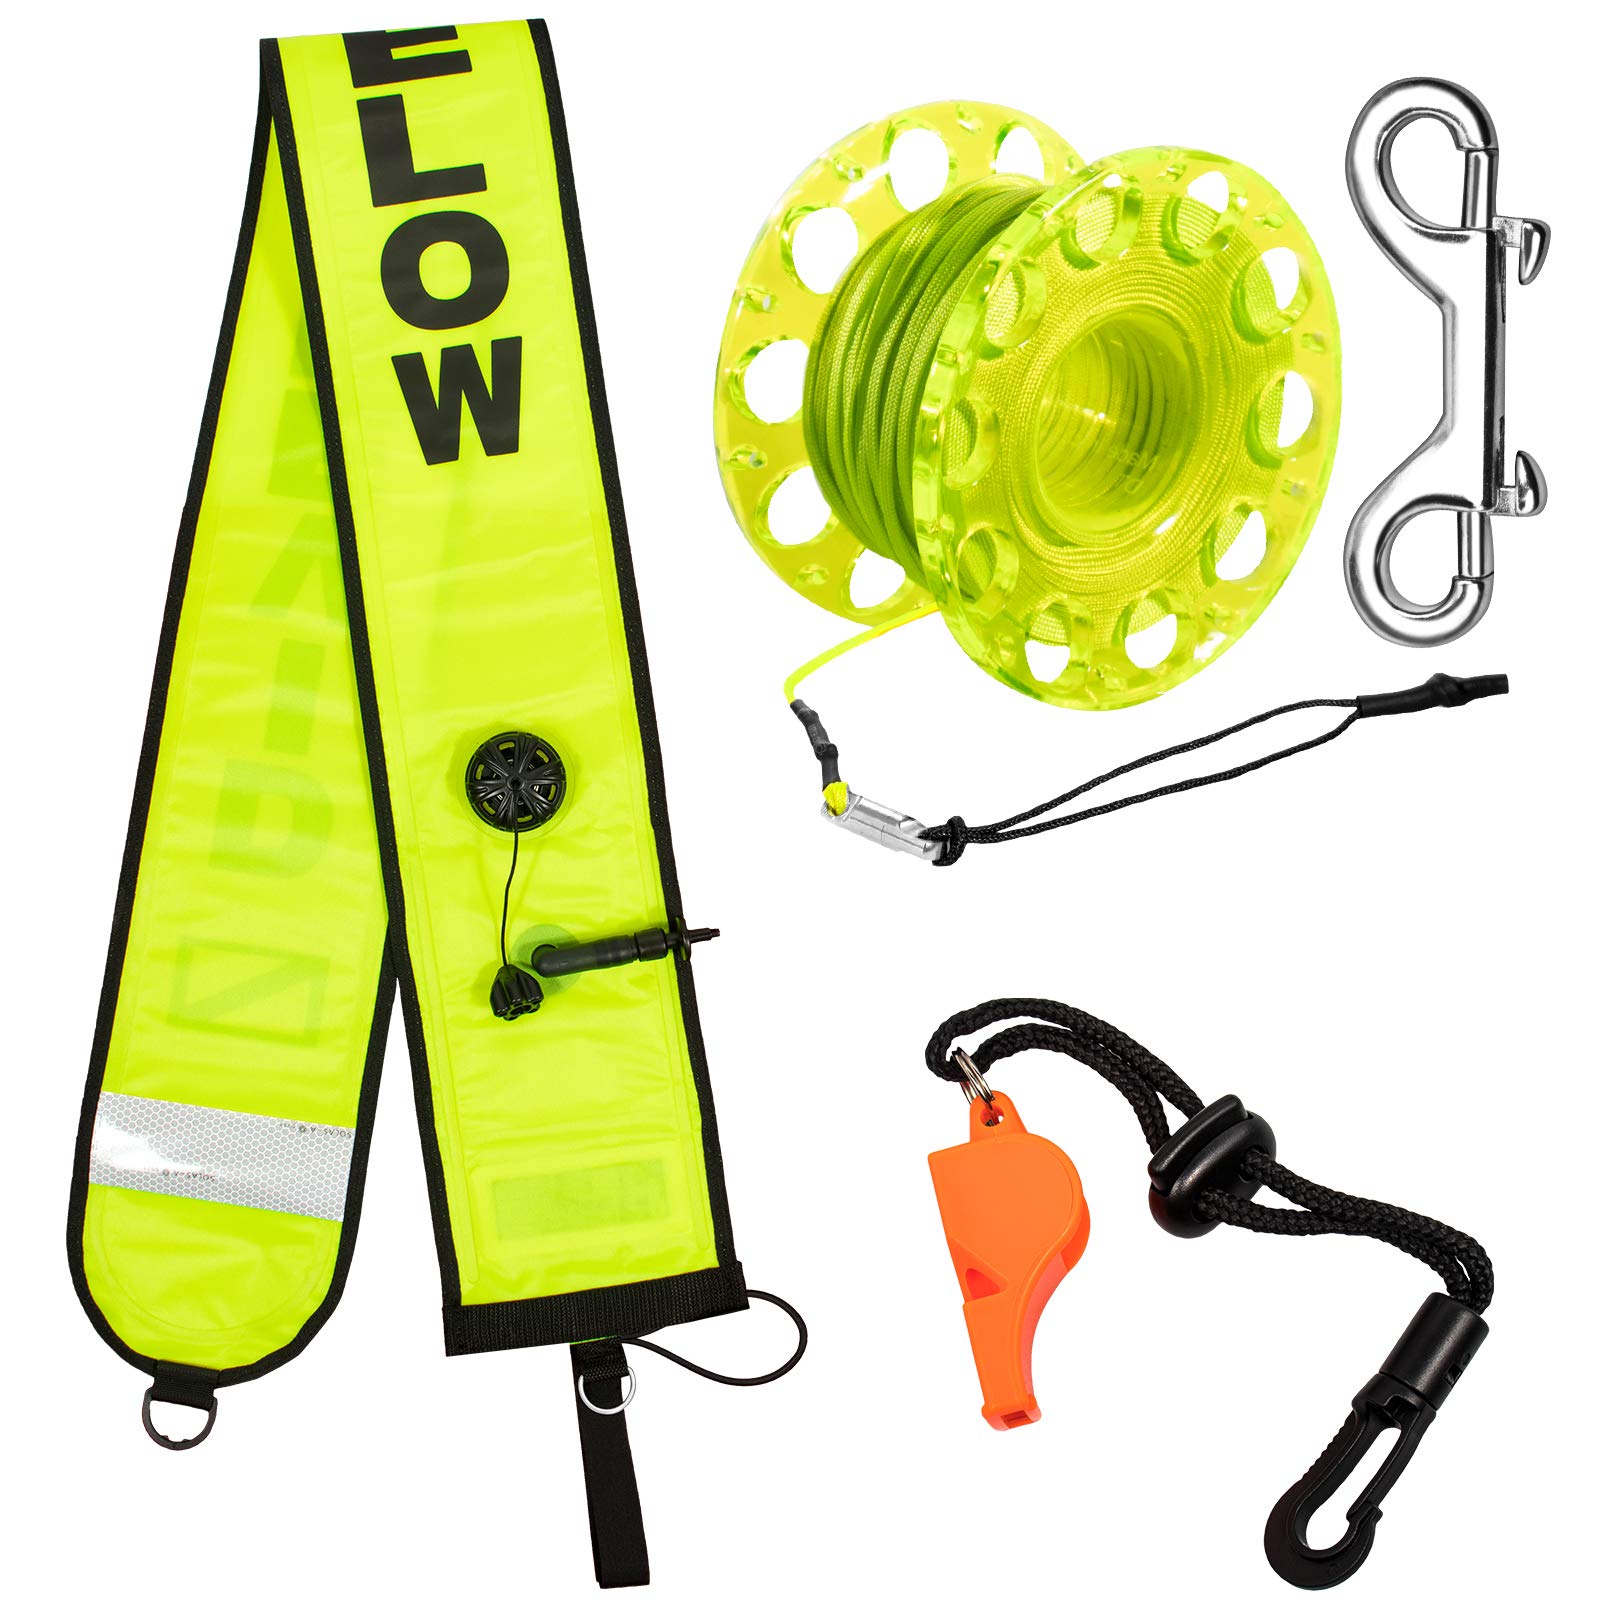  Scuba Surface Marker Buoy (SMB) Set, 5ft Hi-Visibility  Reflective Band Open Bottom Safety Sausage with 100ft Alloy Finger Spool  Dive Reel and Double-ended Snap Hook Fits Underwater Fluorescent Yellow 